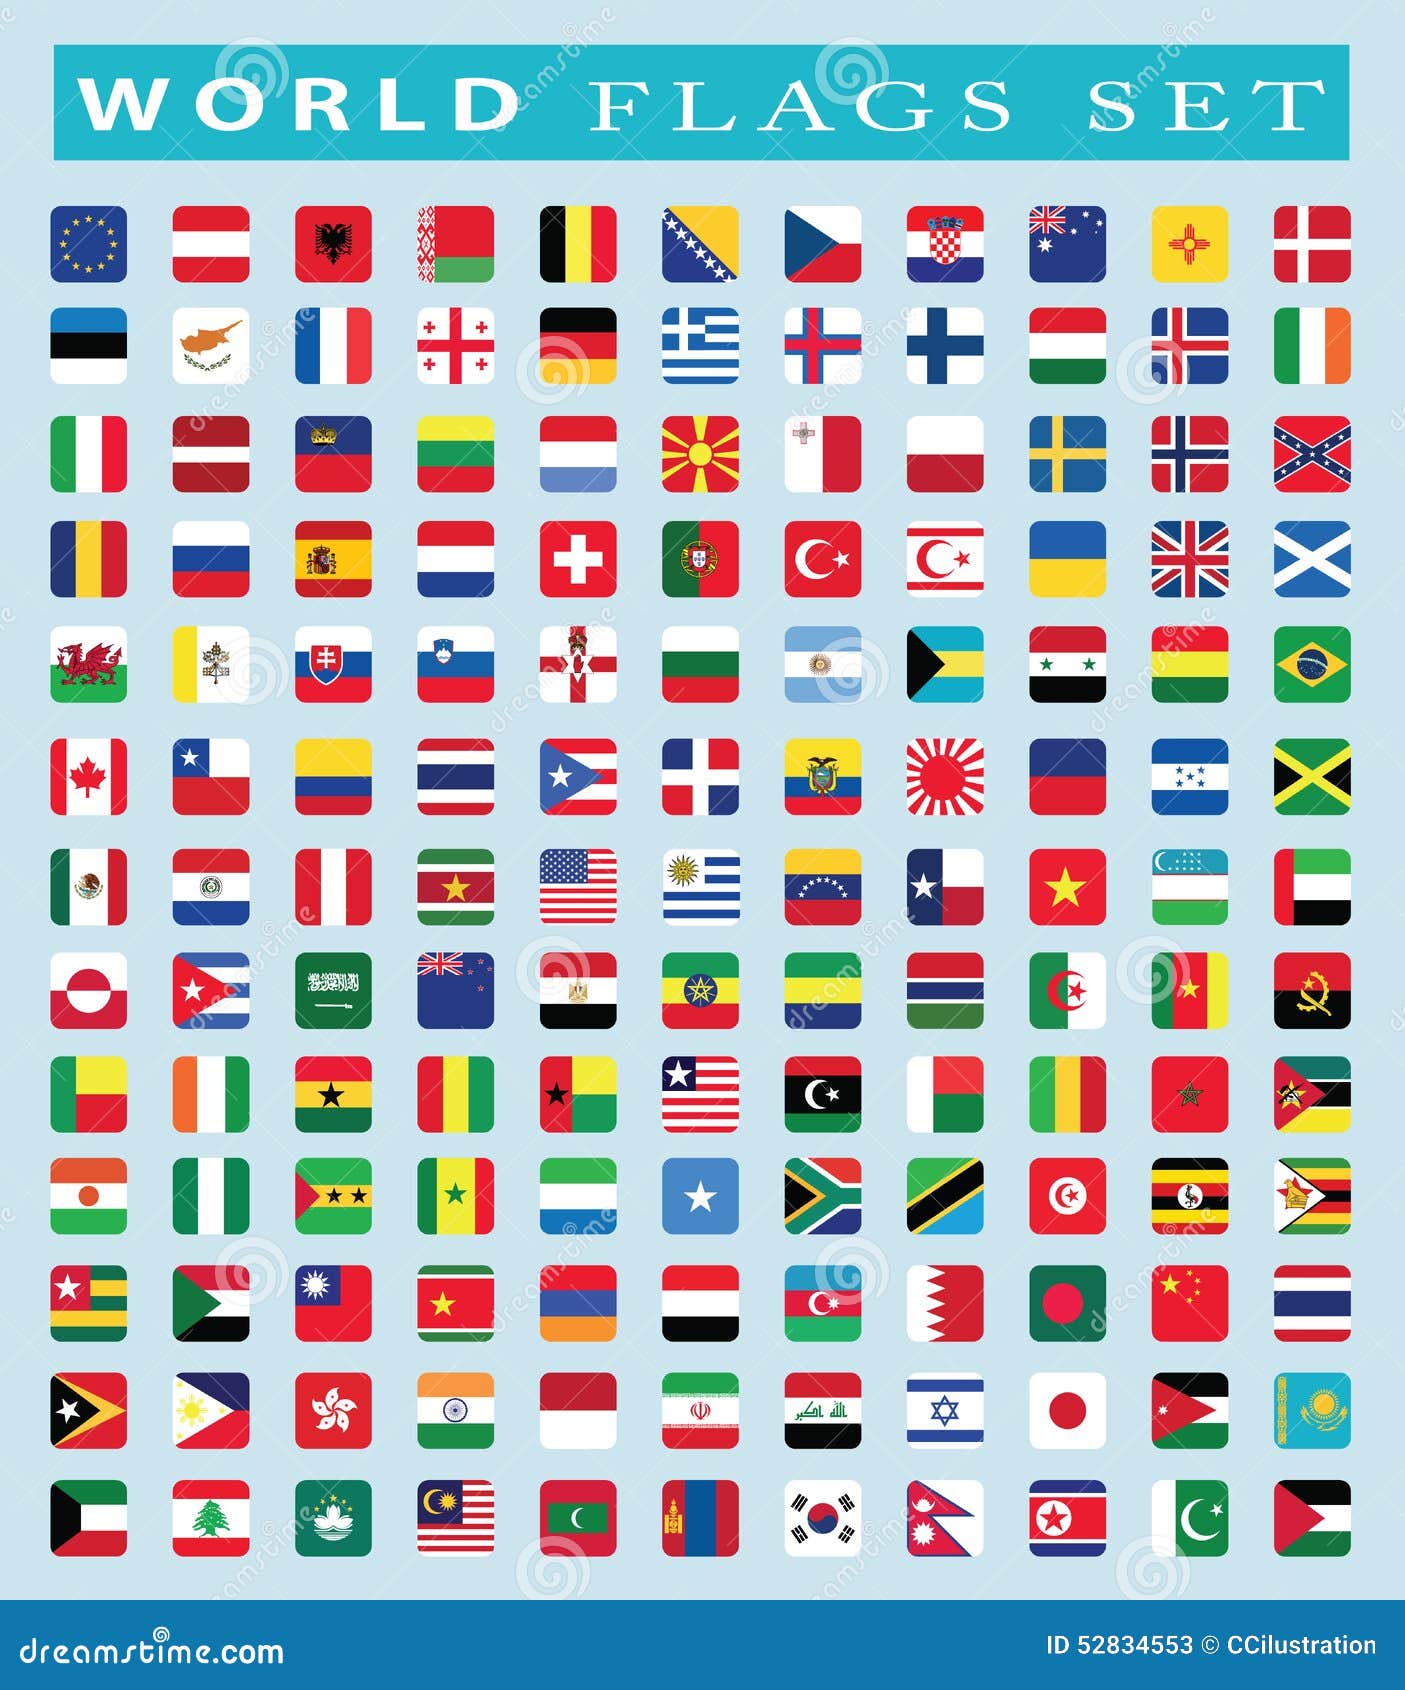 Download World Flags Icon, Vector Illustration. Stock Vector ...